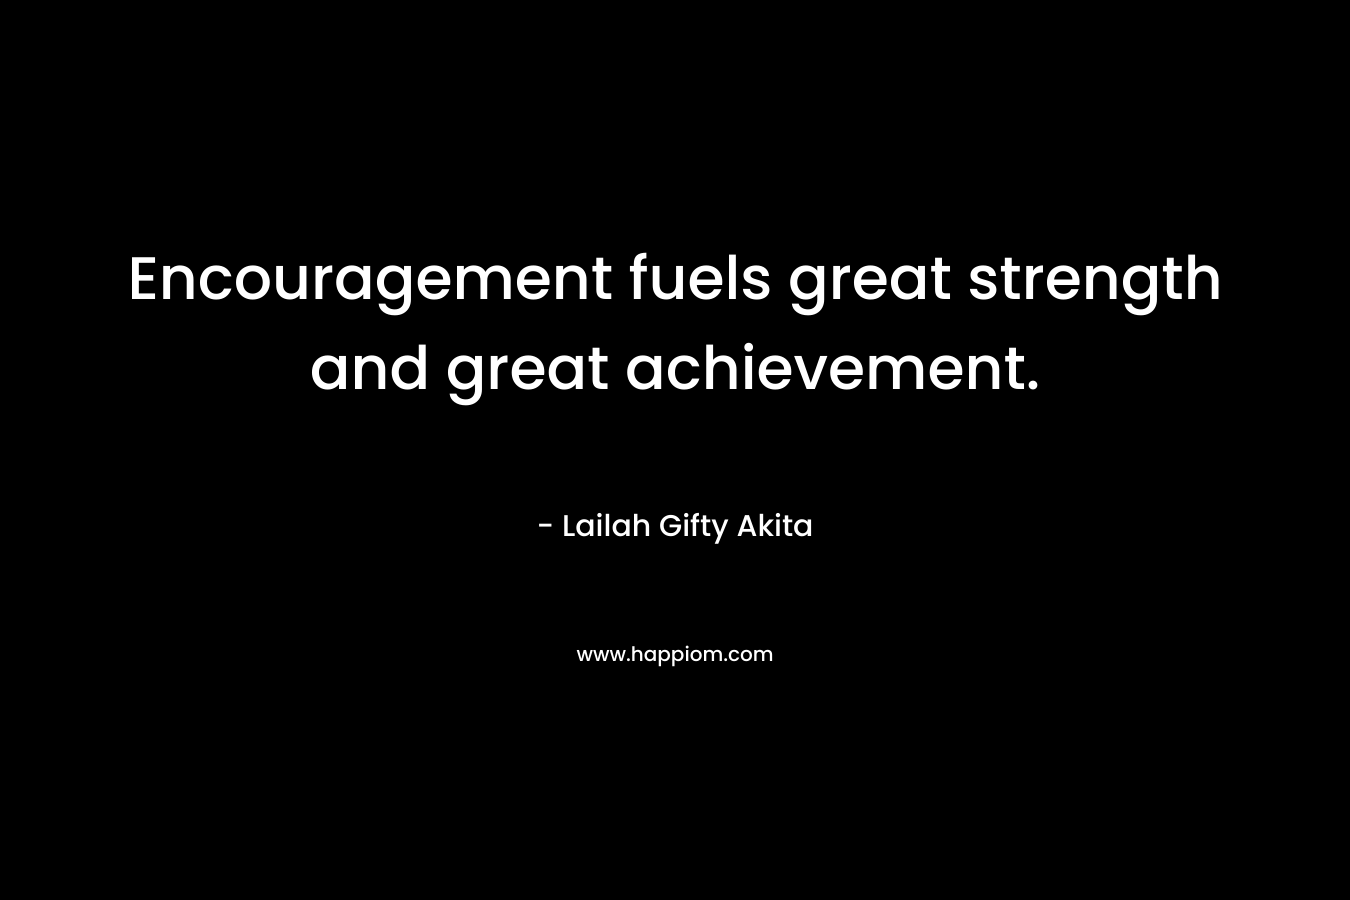 Encouragement fuels great strength and great achievement.